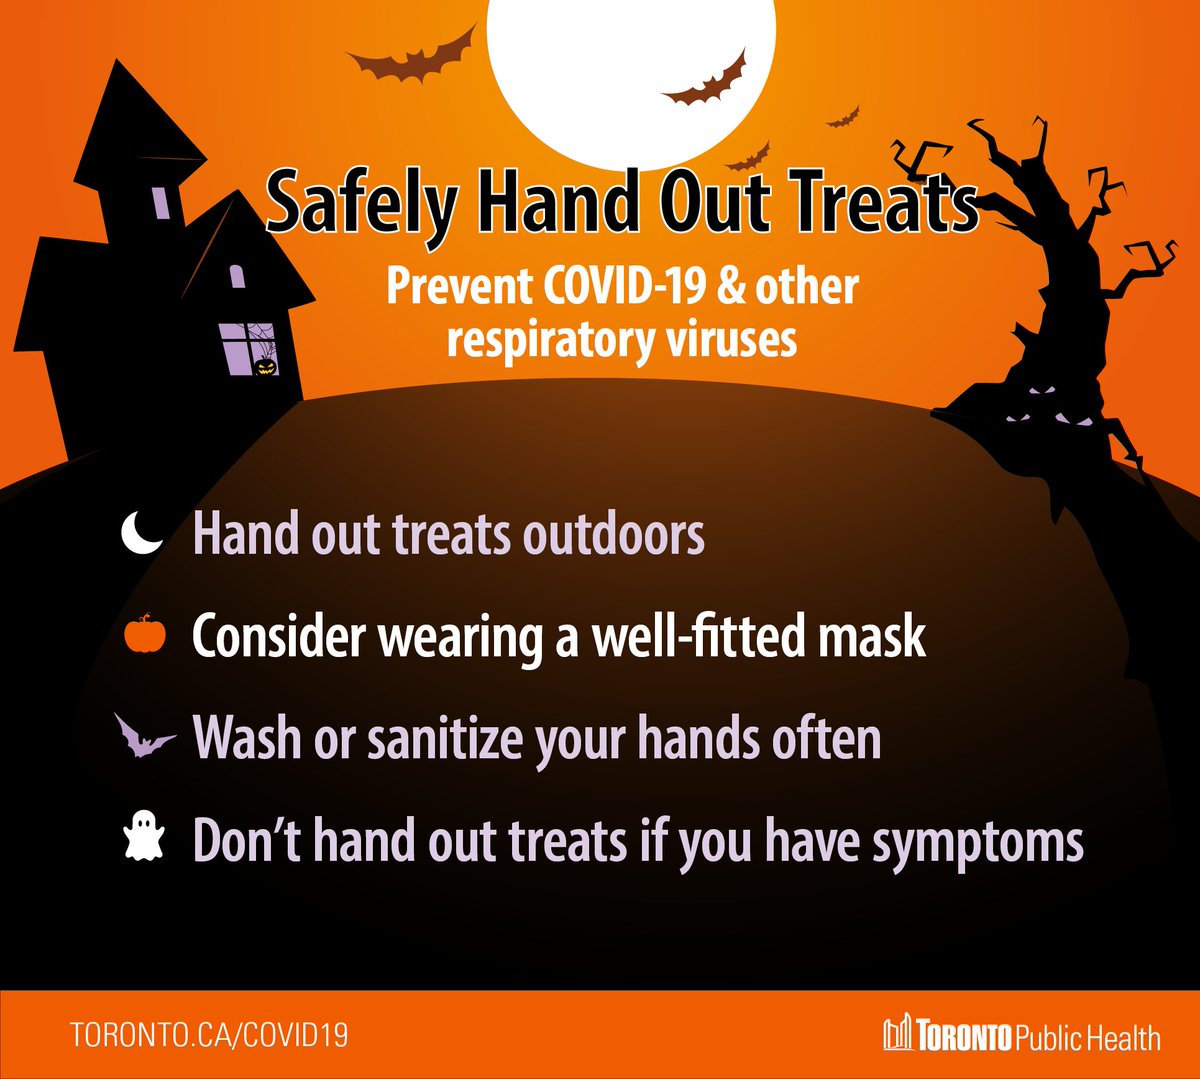 Handing out candy this #Halloween season 👻🎃? Here are some tips to stay safe and prevent #COVID19 & other respiratory virus spread: